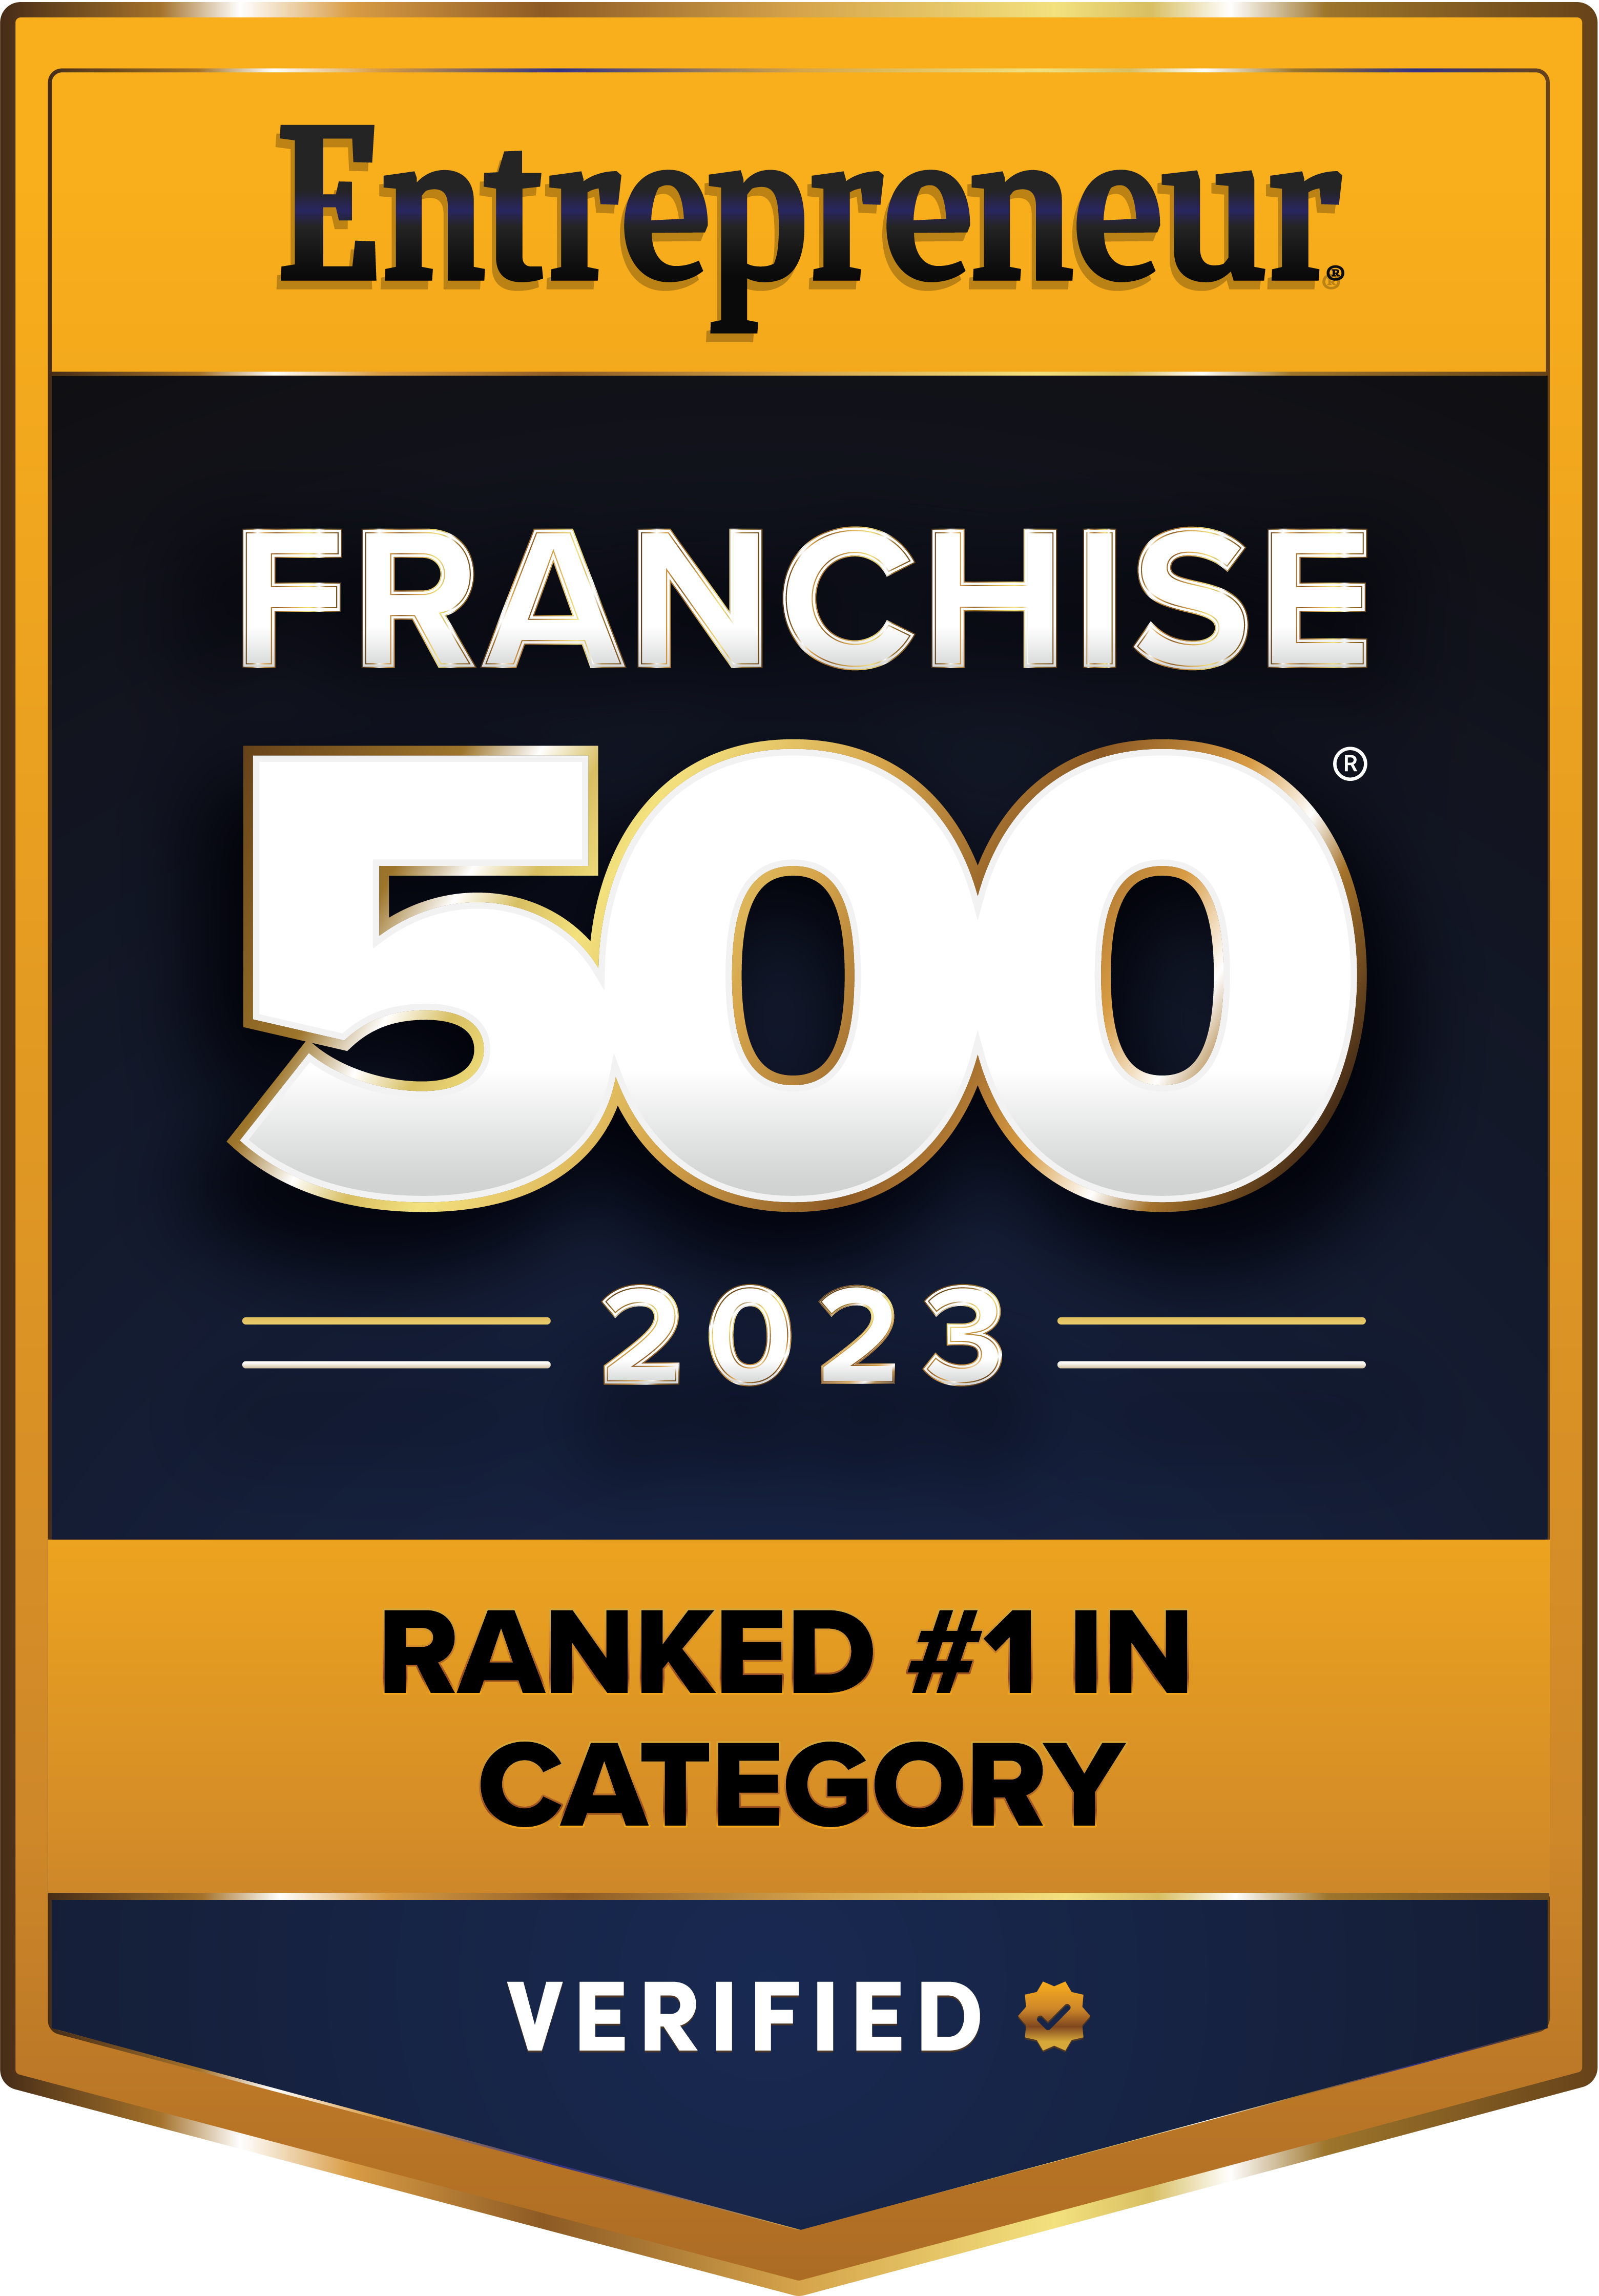 1-10-23-F500-Badge-2023-Ranked-1-in-Category